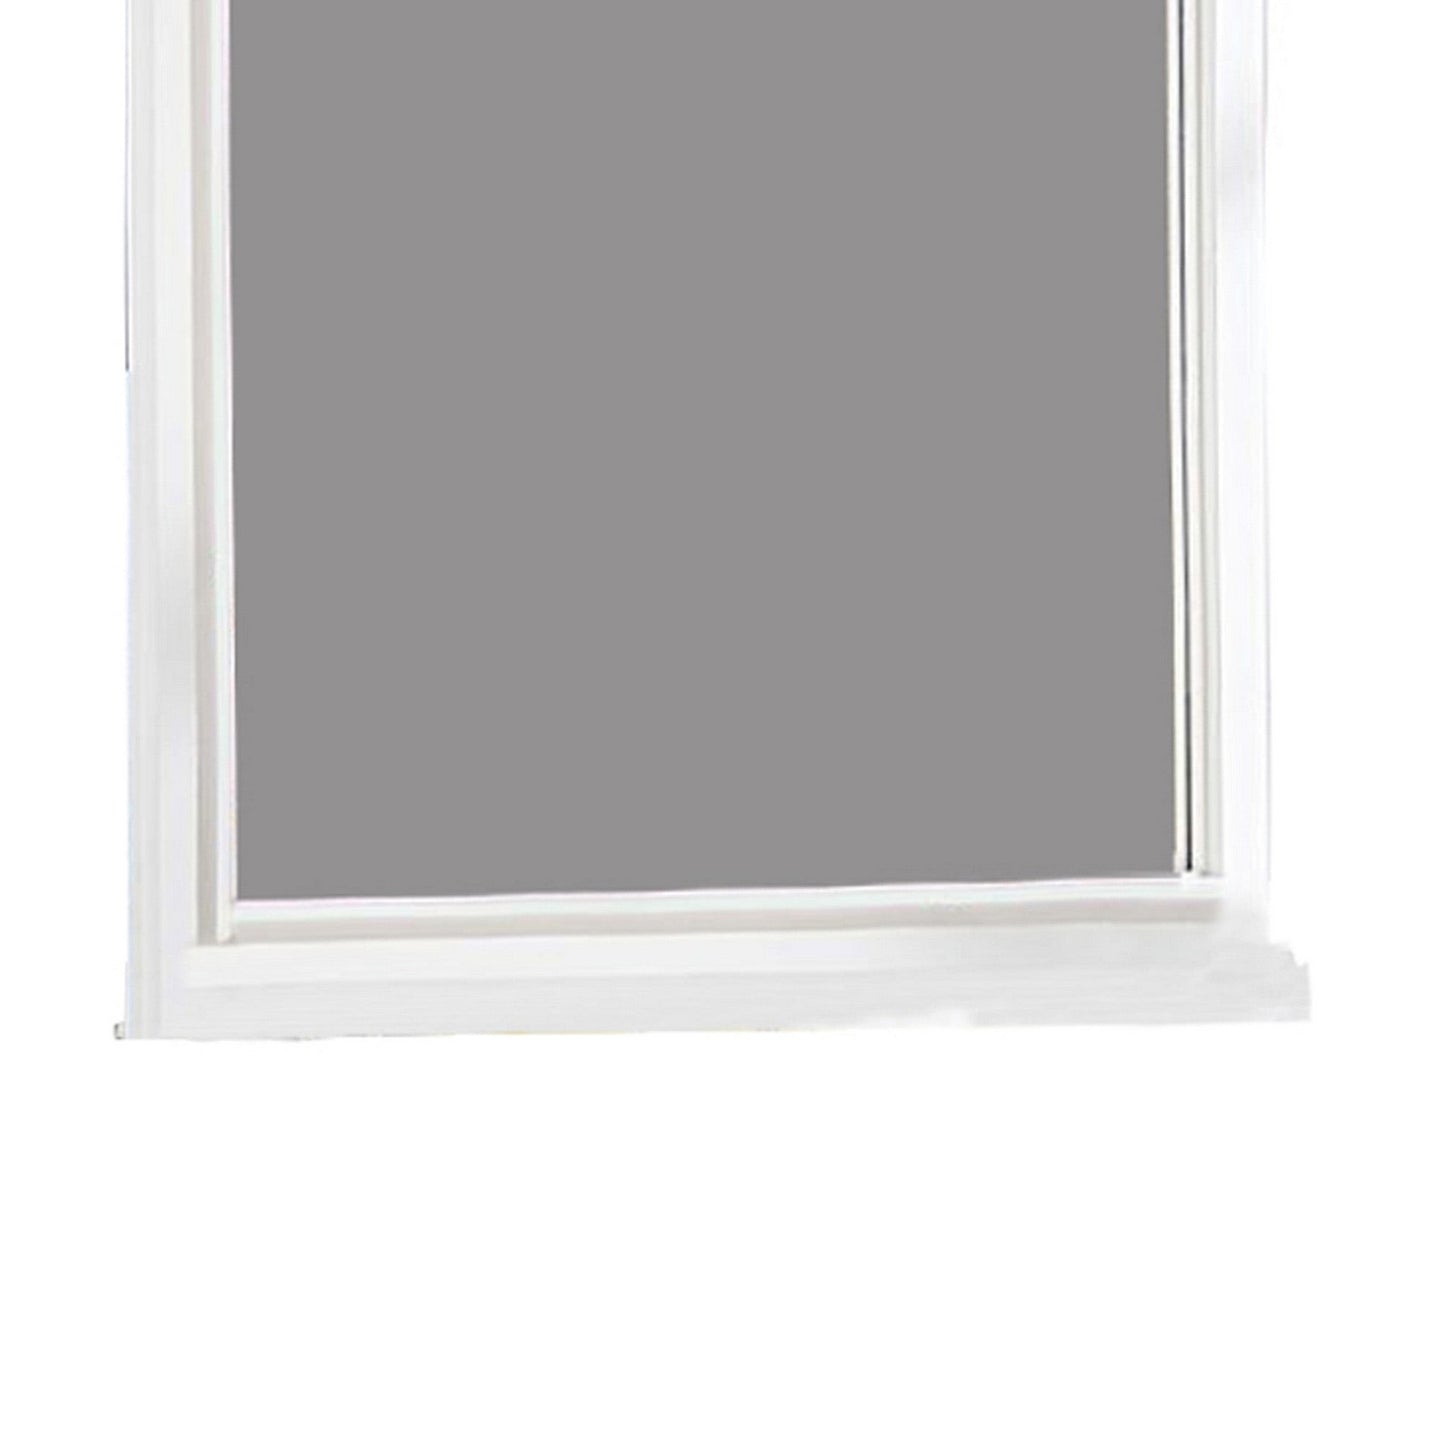 Benzara White Transitional Style Wooden Frame Mirror With Molded Camelback Top